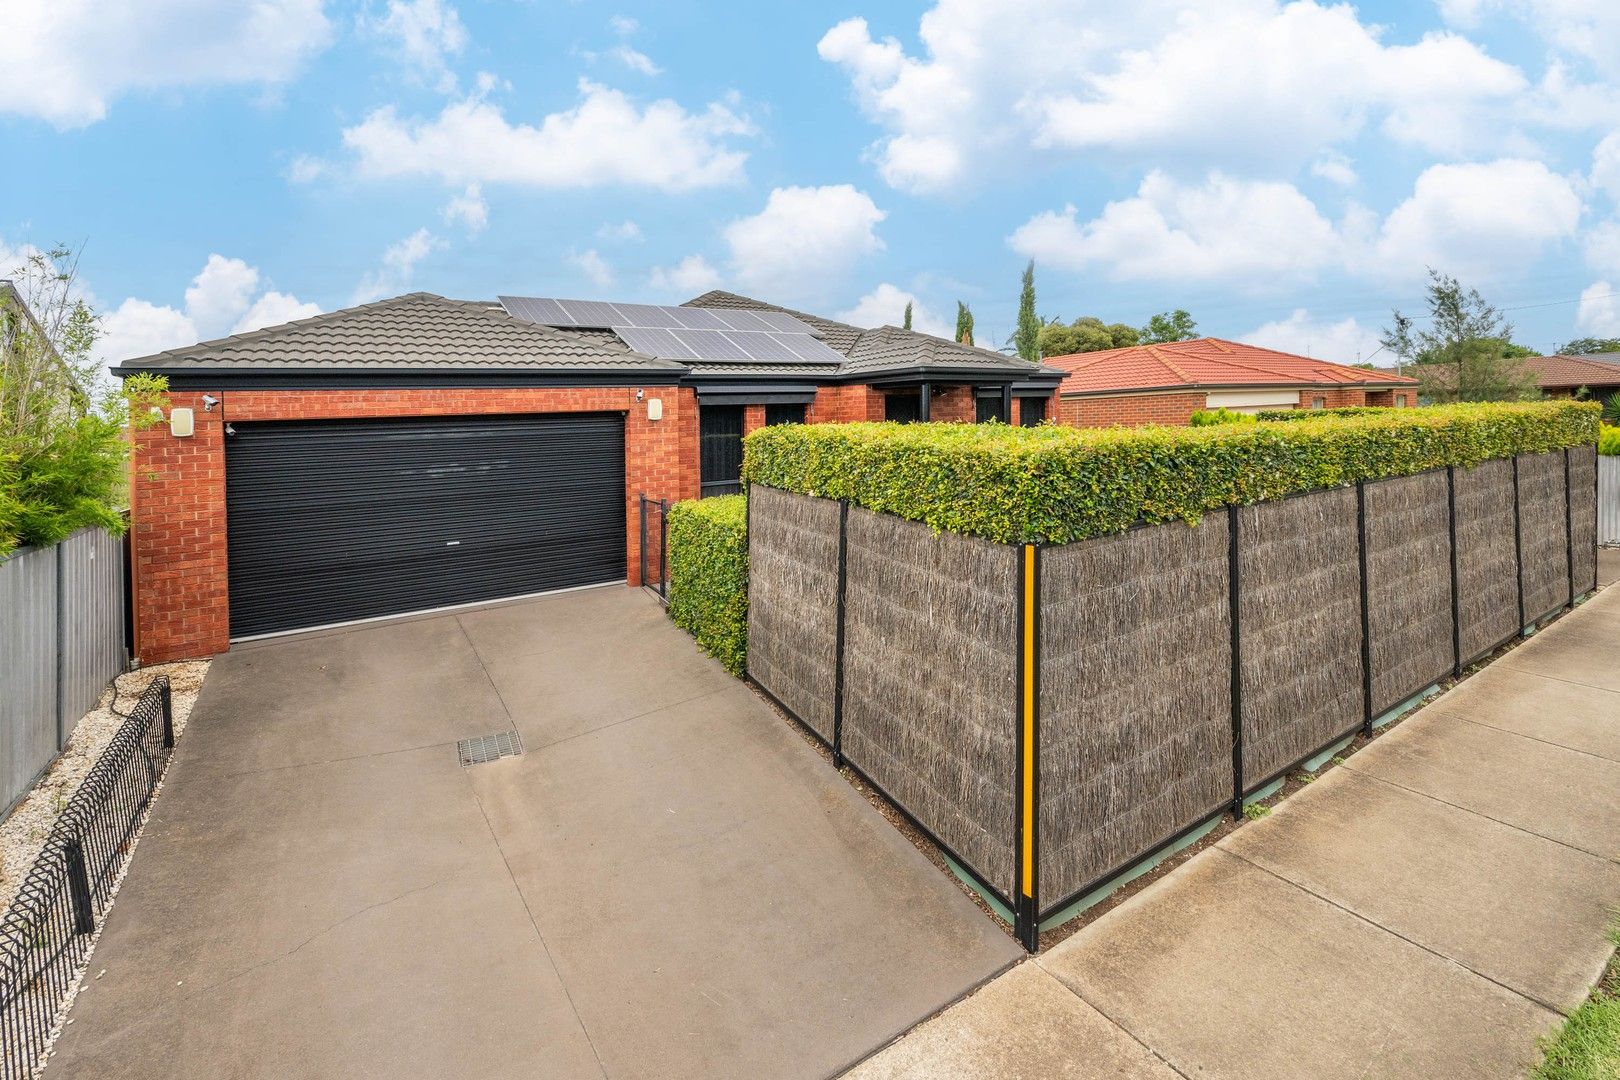 2 bedrooms Townhouse in 1/24 Brauman Street SHEPPARTON VIC, 3630